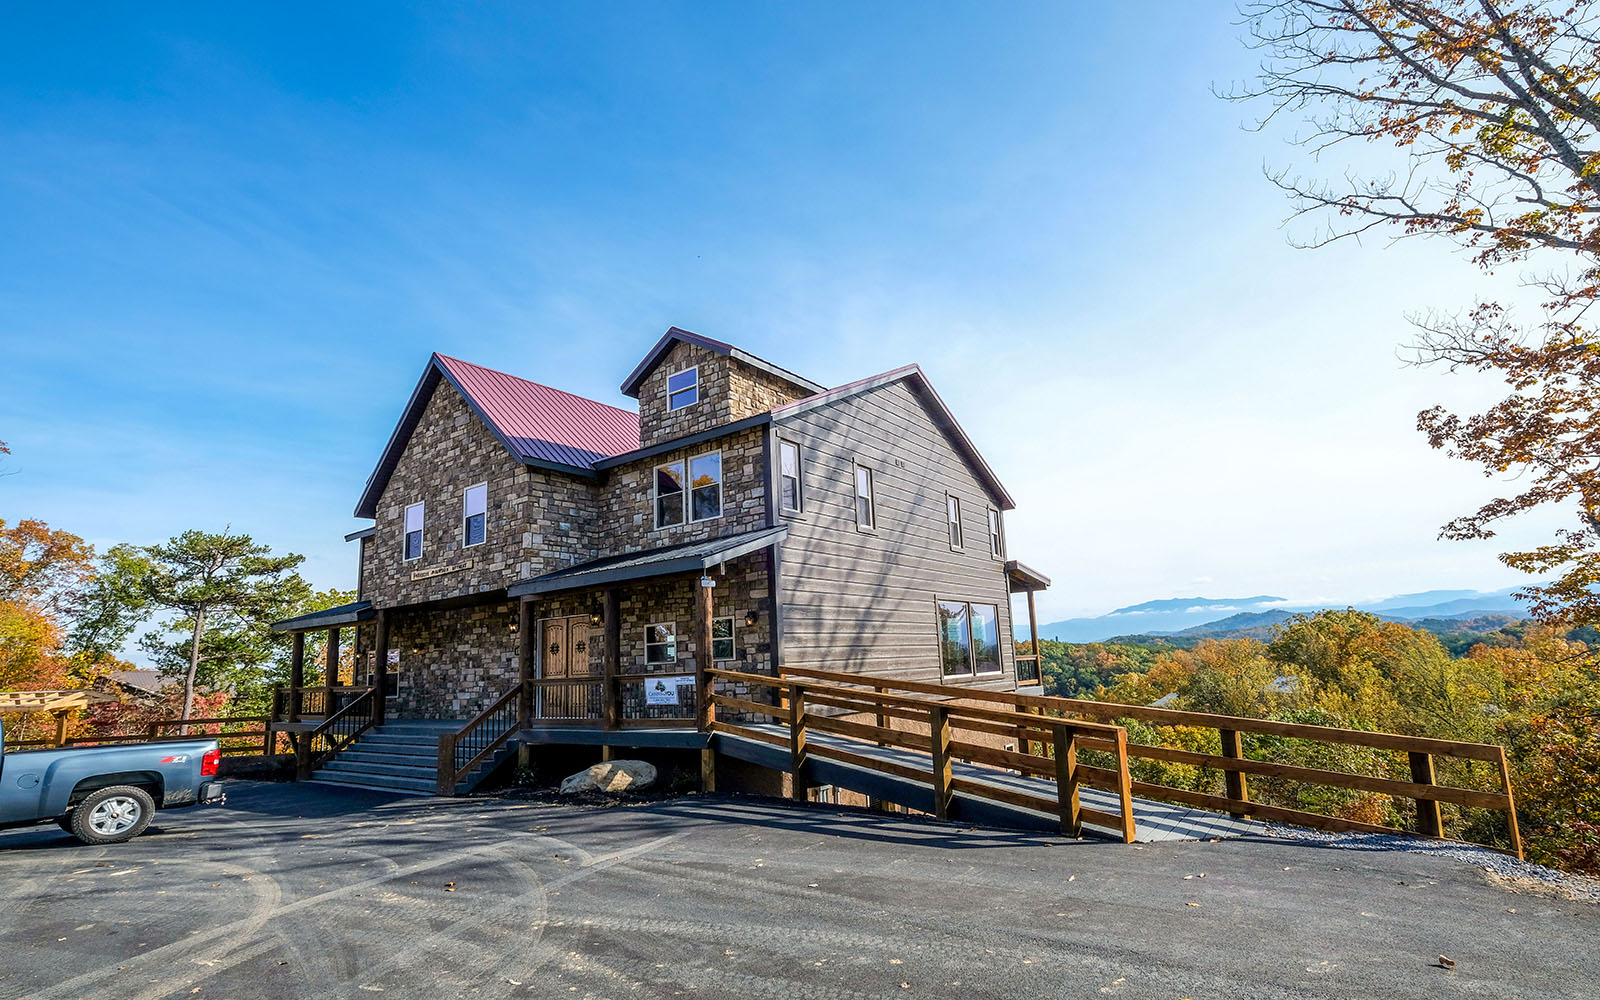 https://www.pigeonforgetncabins.com/wp-content/uploads/2022/02/pigeon-forge-cabin-paradise-mountain-retreat-exterior-7.jpg